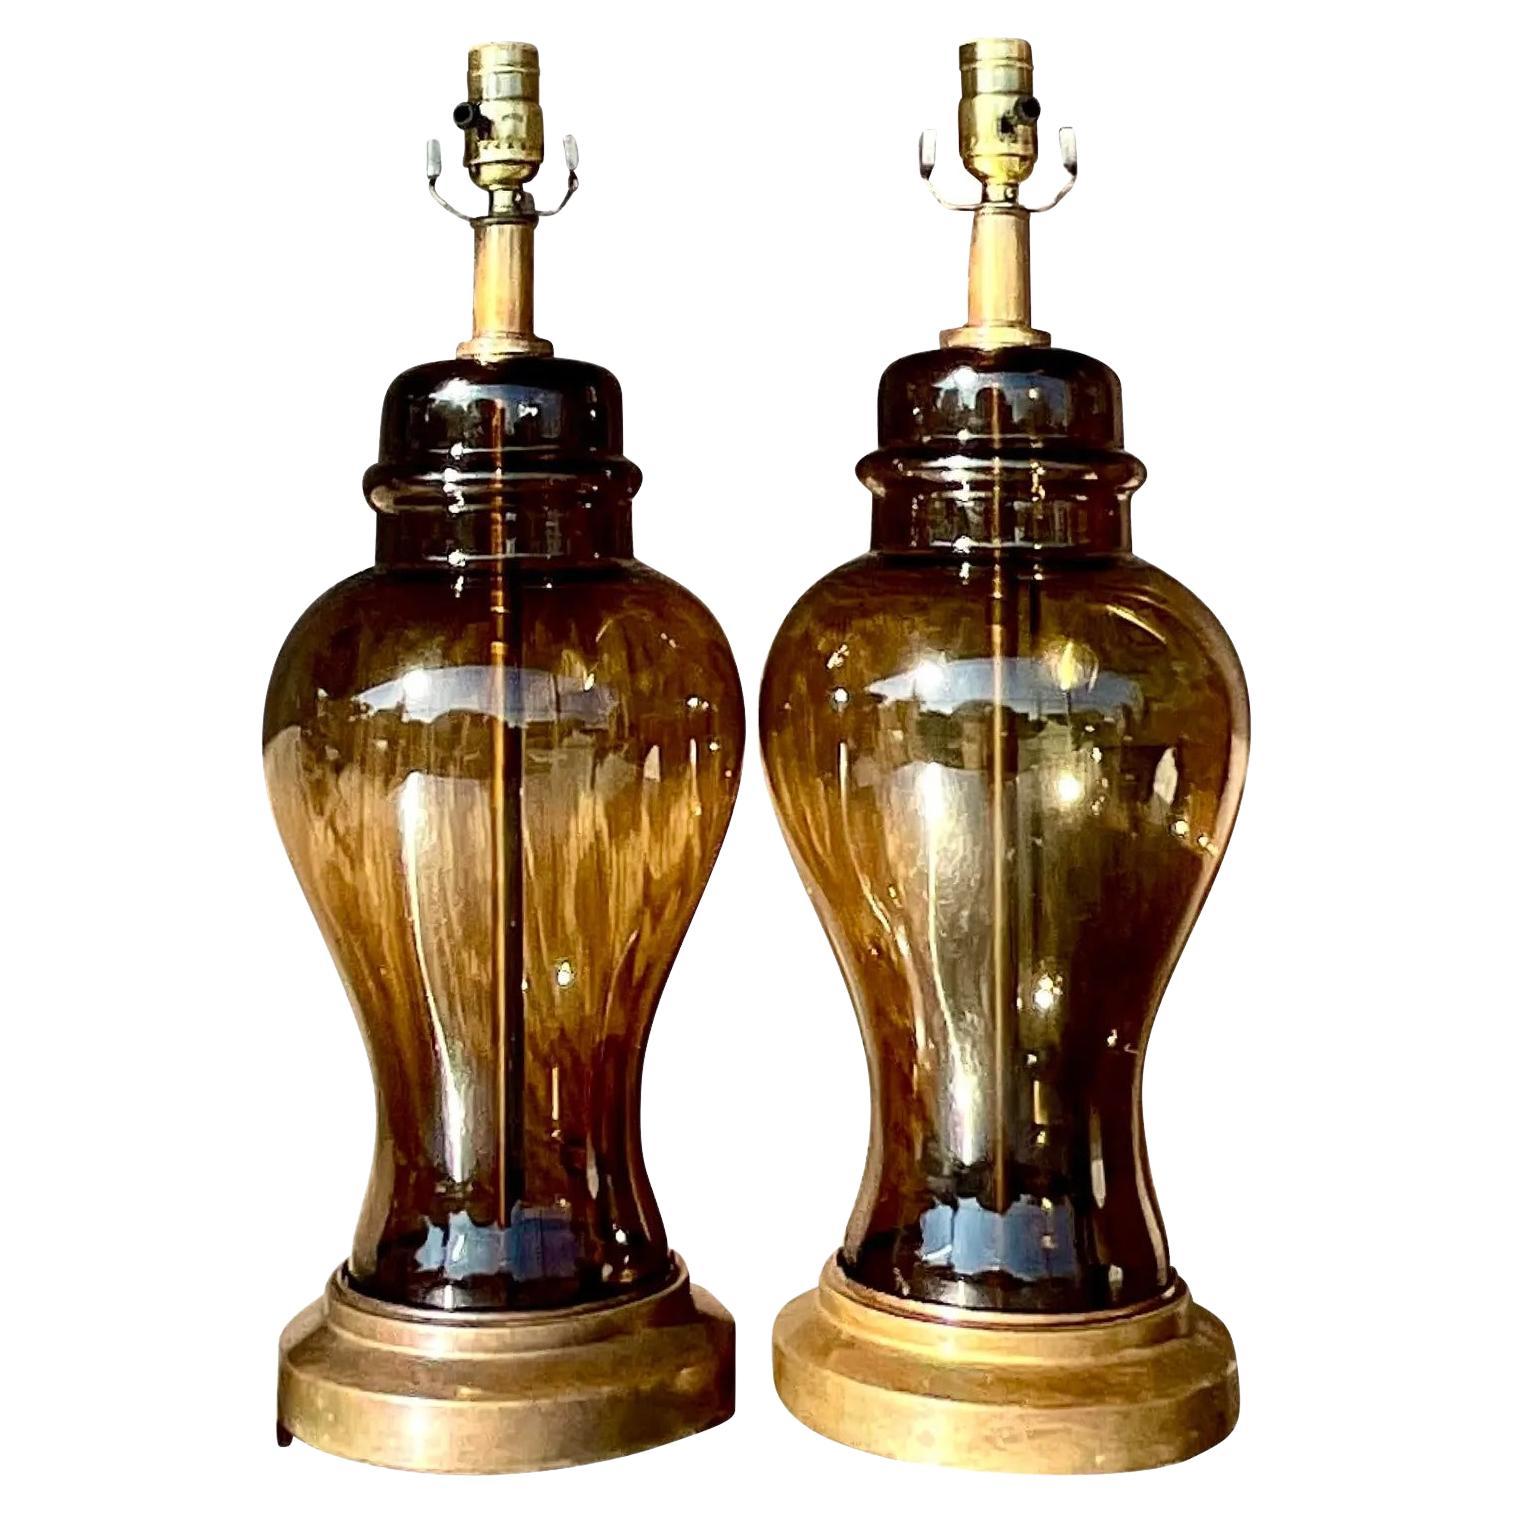 Vintage Boho Smoked Glass Ginger Jar Lamps - a Pair For Sale